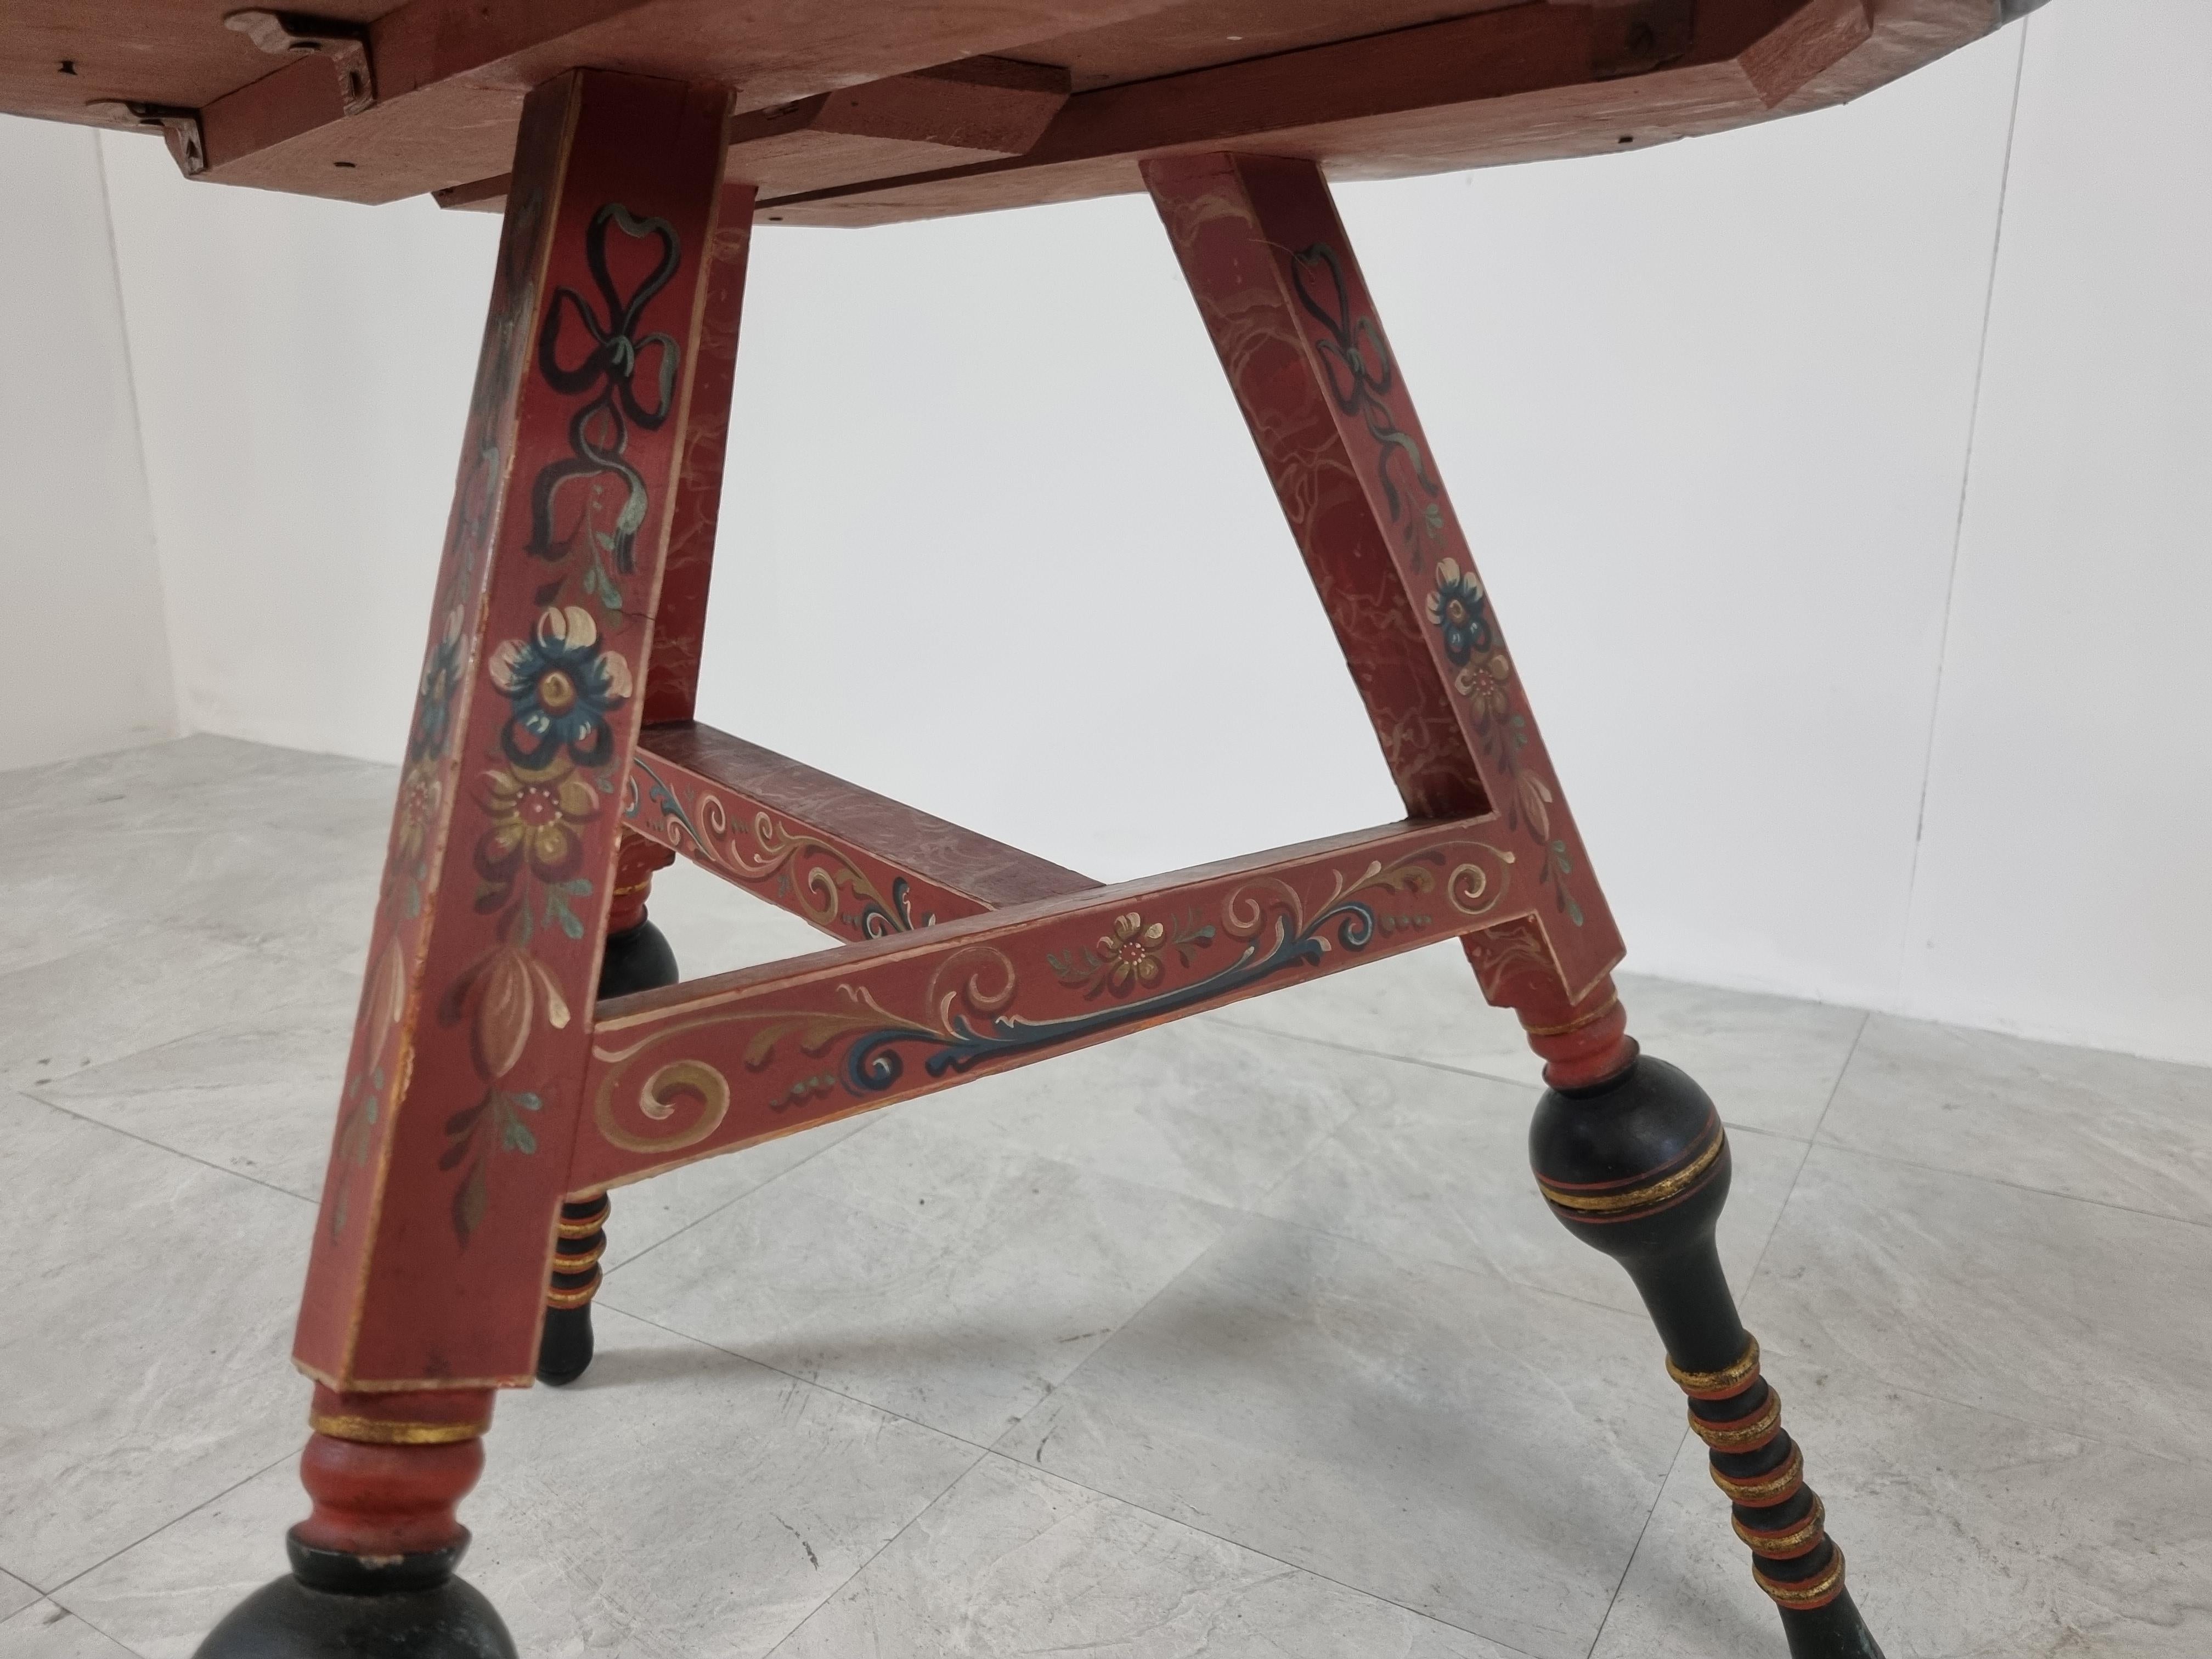 Folk art tripod coffee table.

Hand painted floral design.

Produced in village in the Netherlands 'Hindeloopen' - Friesland.

Elegant table with nicely sculptedl egs.

Well preserved, age related wear.

Mid 19th century -